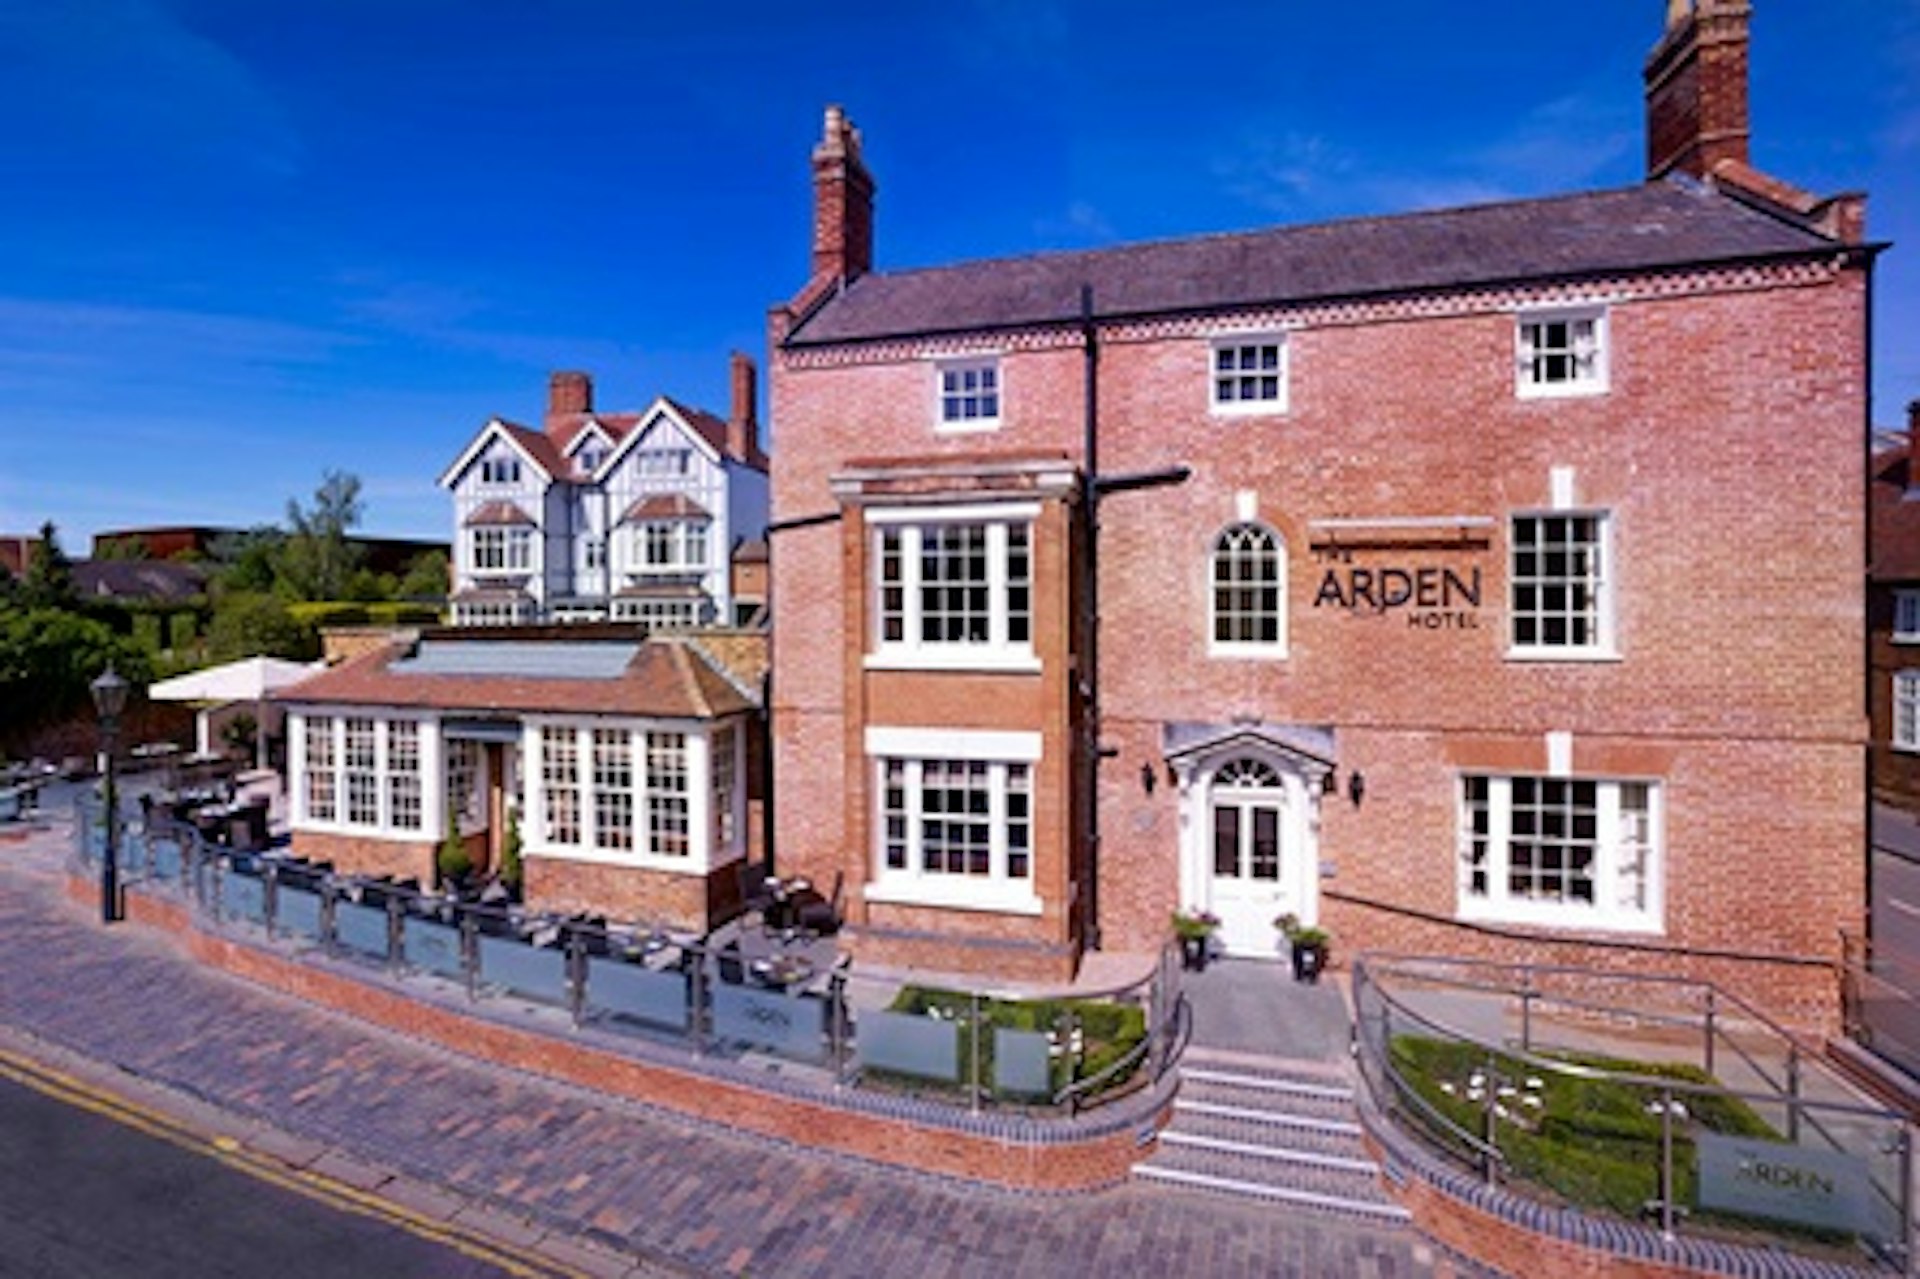 Afternoon Tea for Two at The Arden Hotel in Historic Stratford-upon-Avon 2